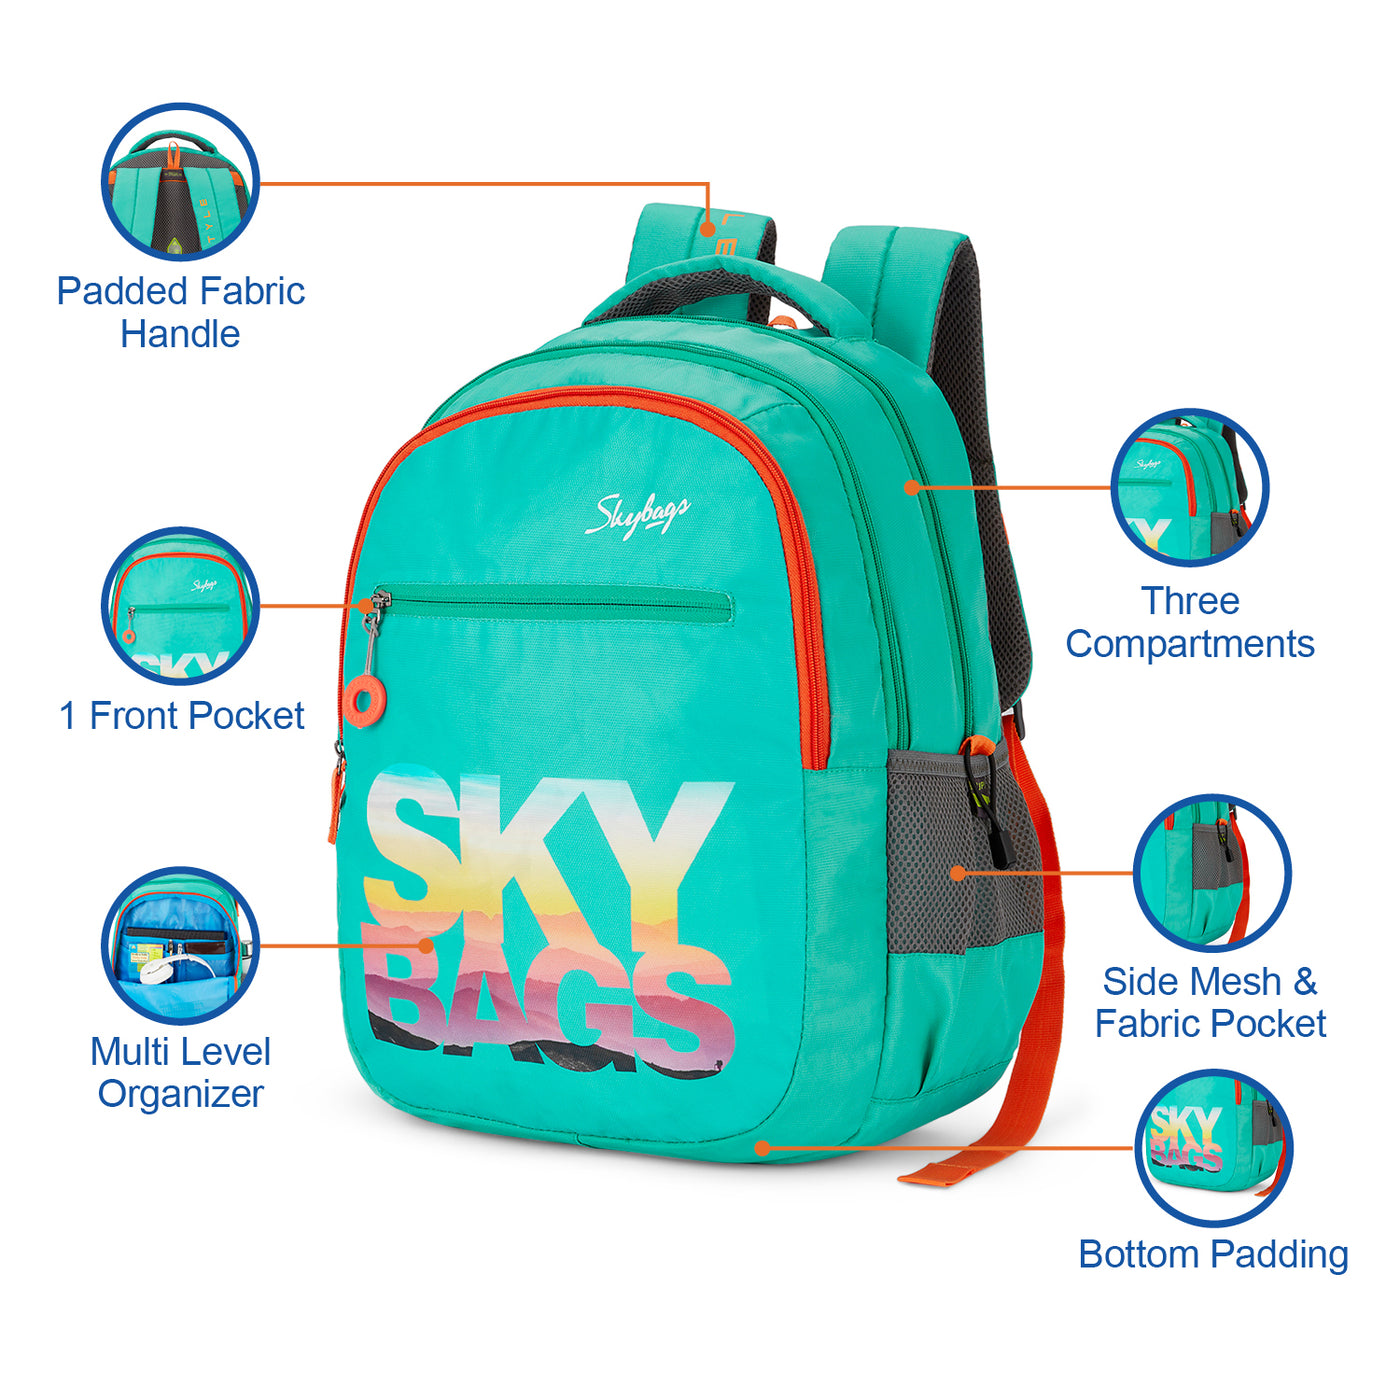 Skybags Skybags Riddle 